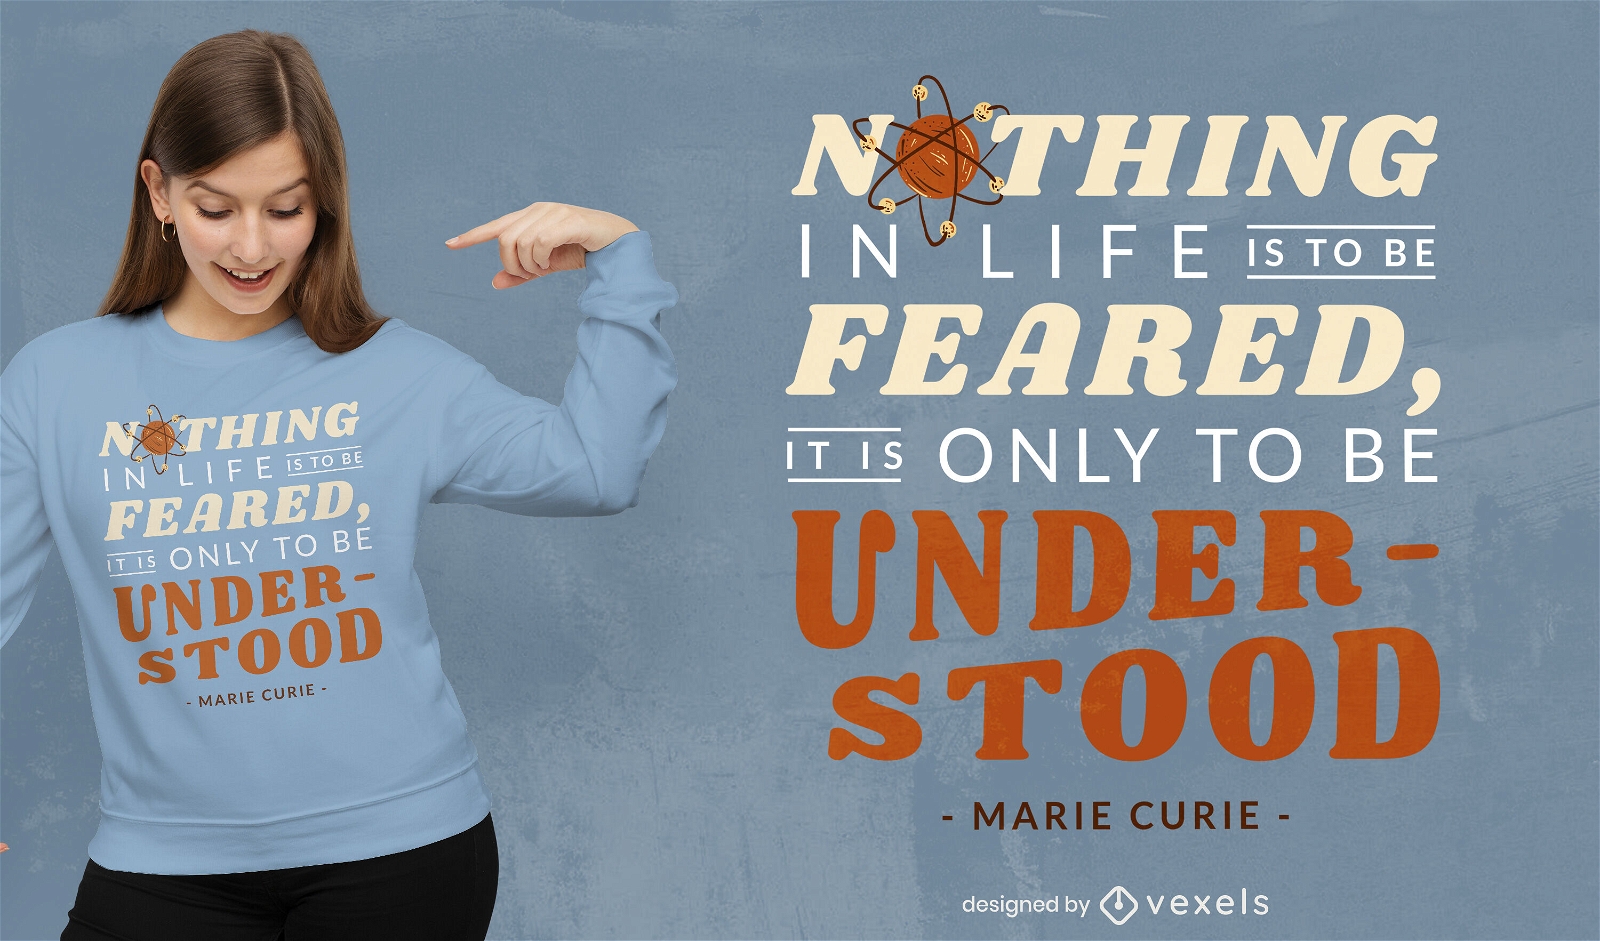 Marie Curie quote t-shirt design